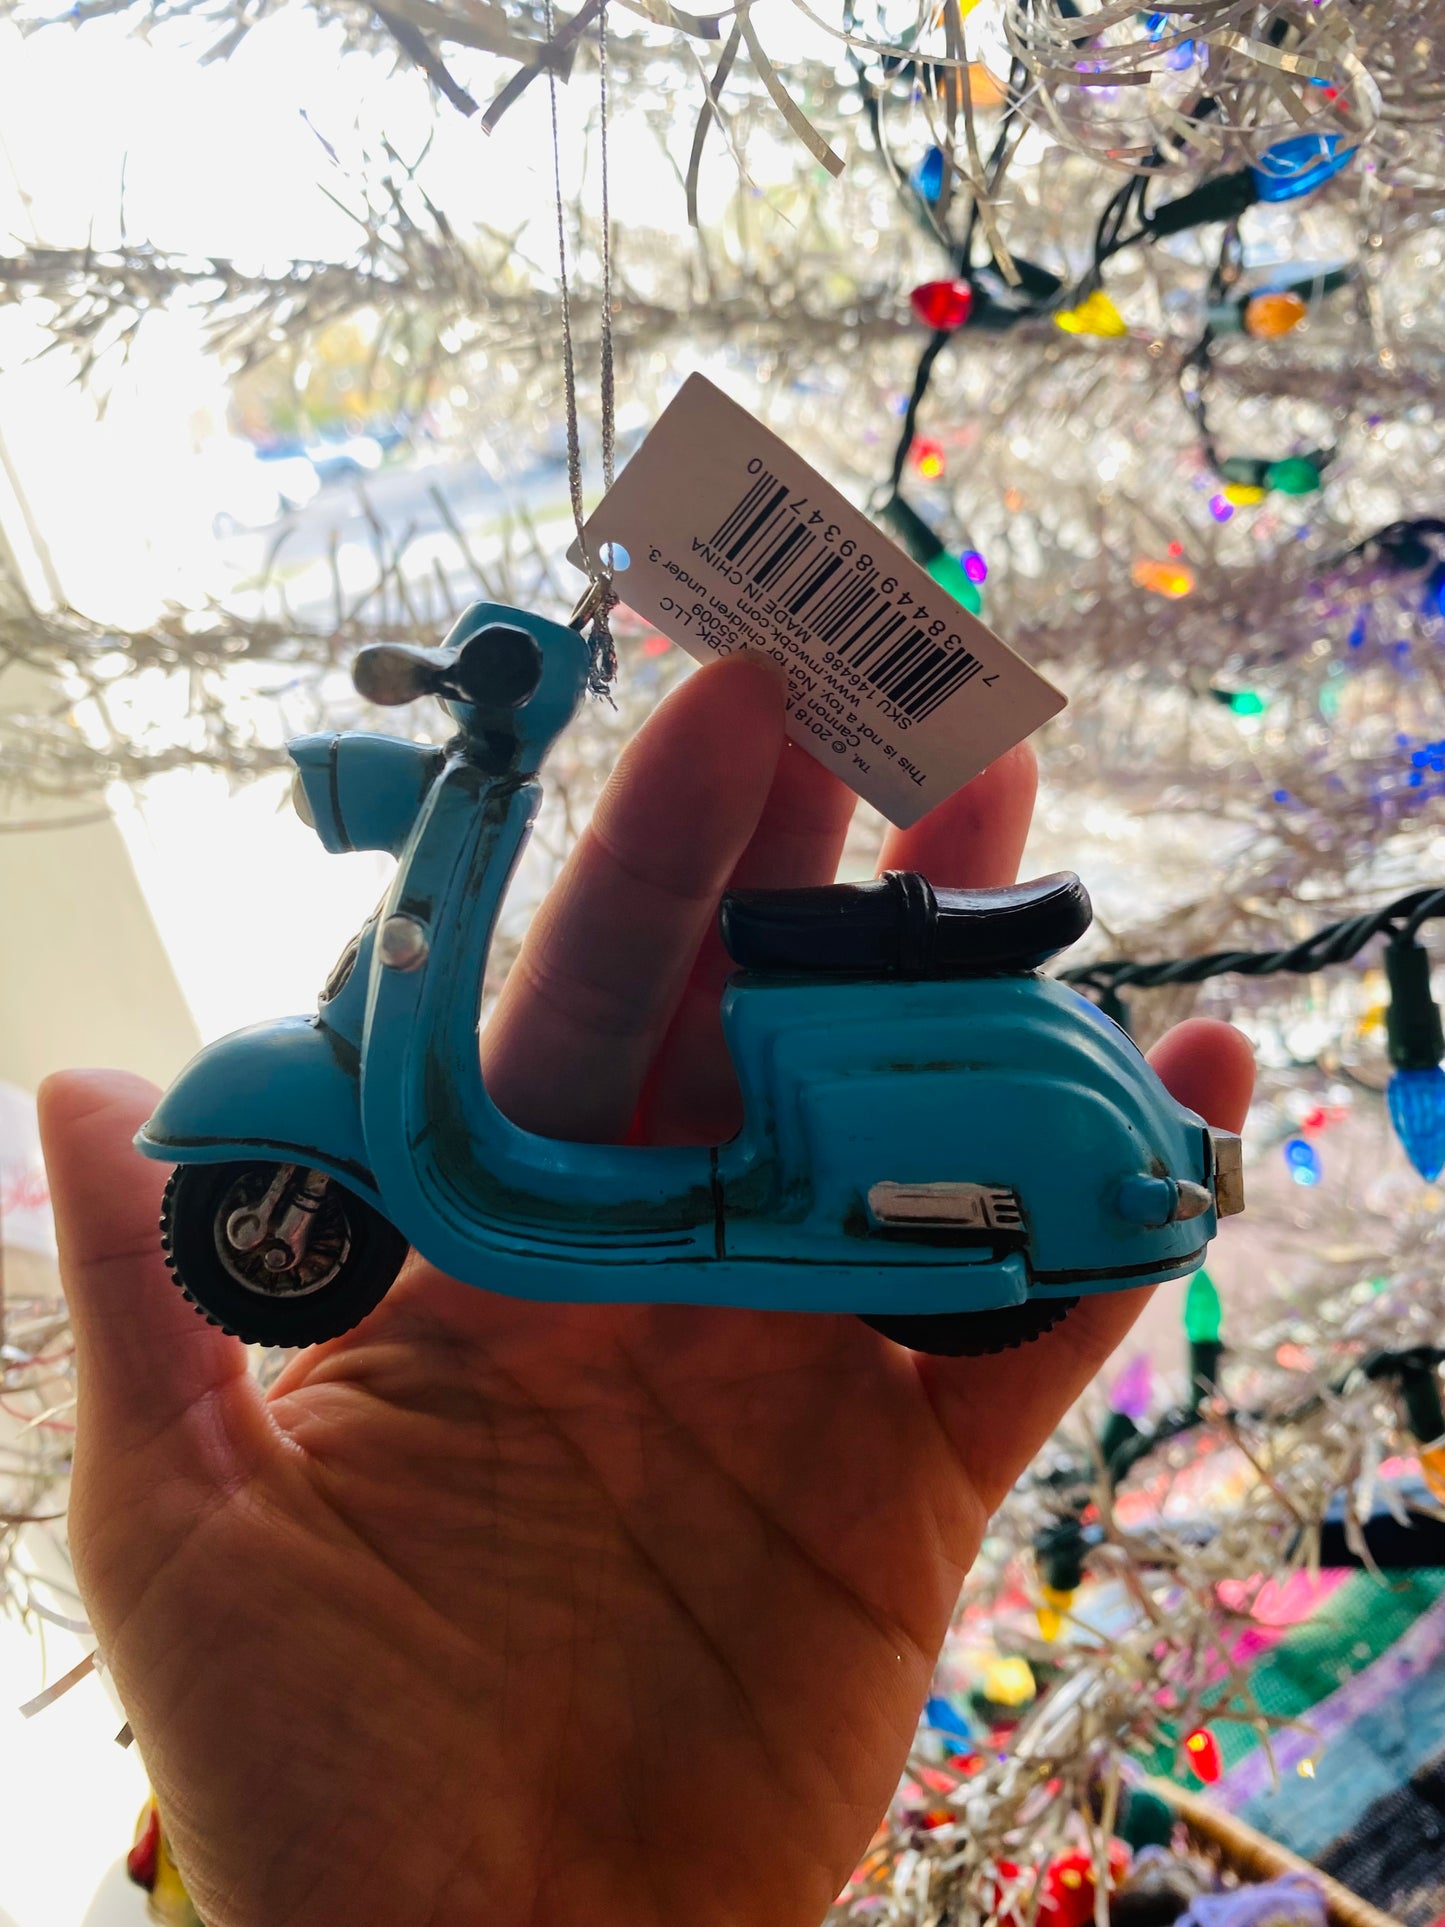 Scooter ornament